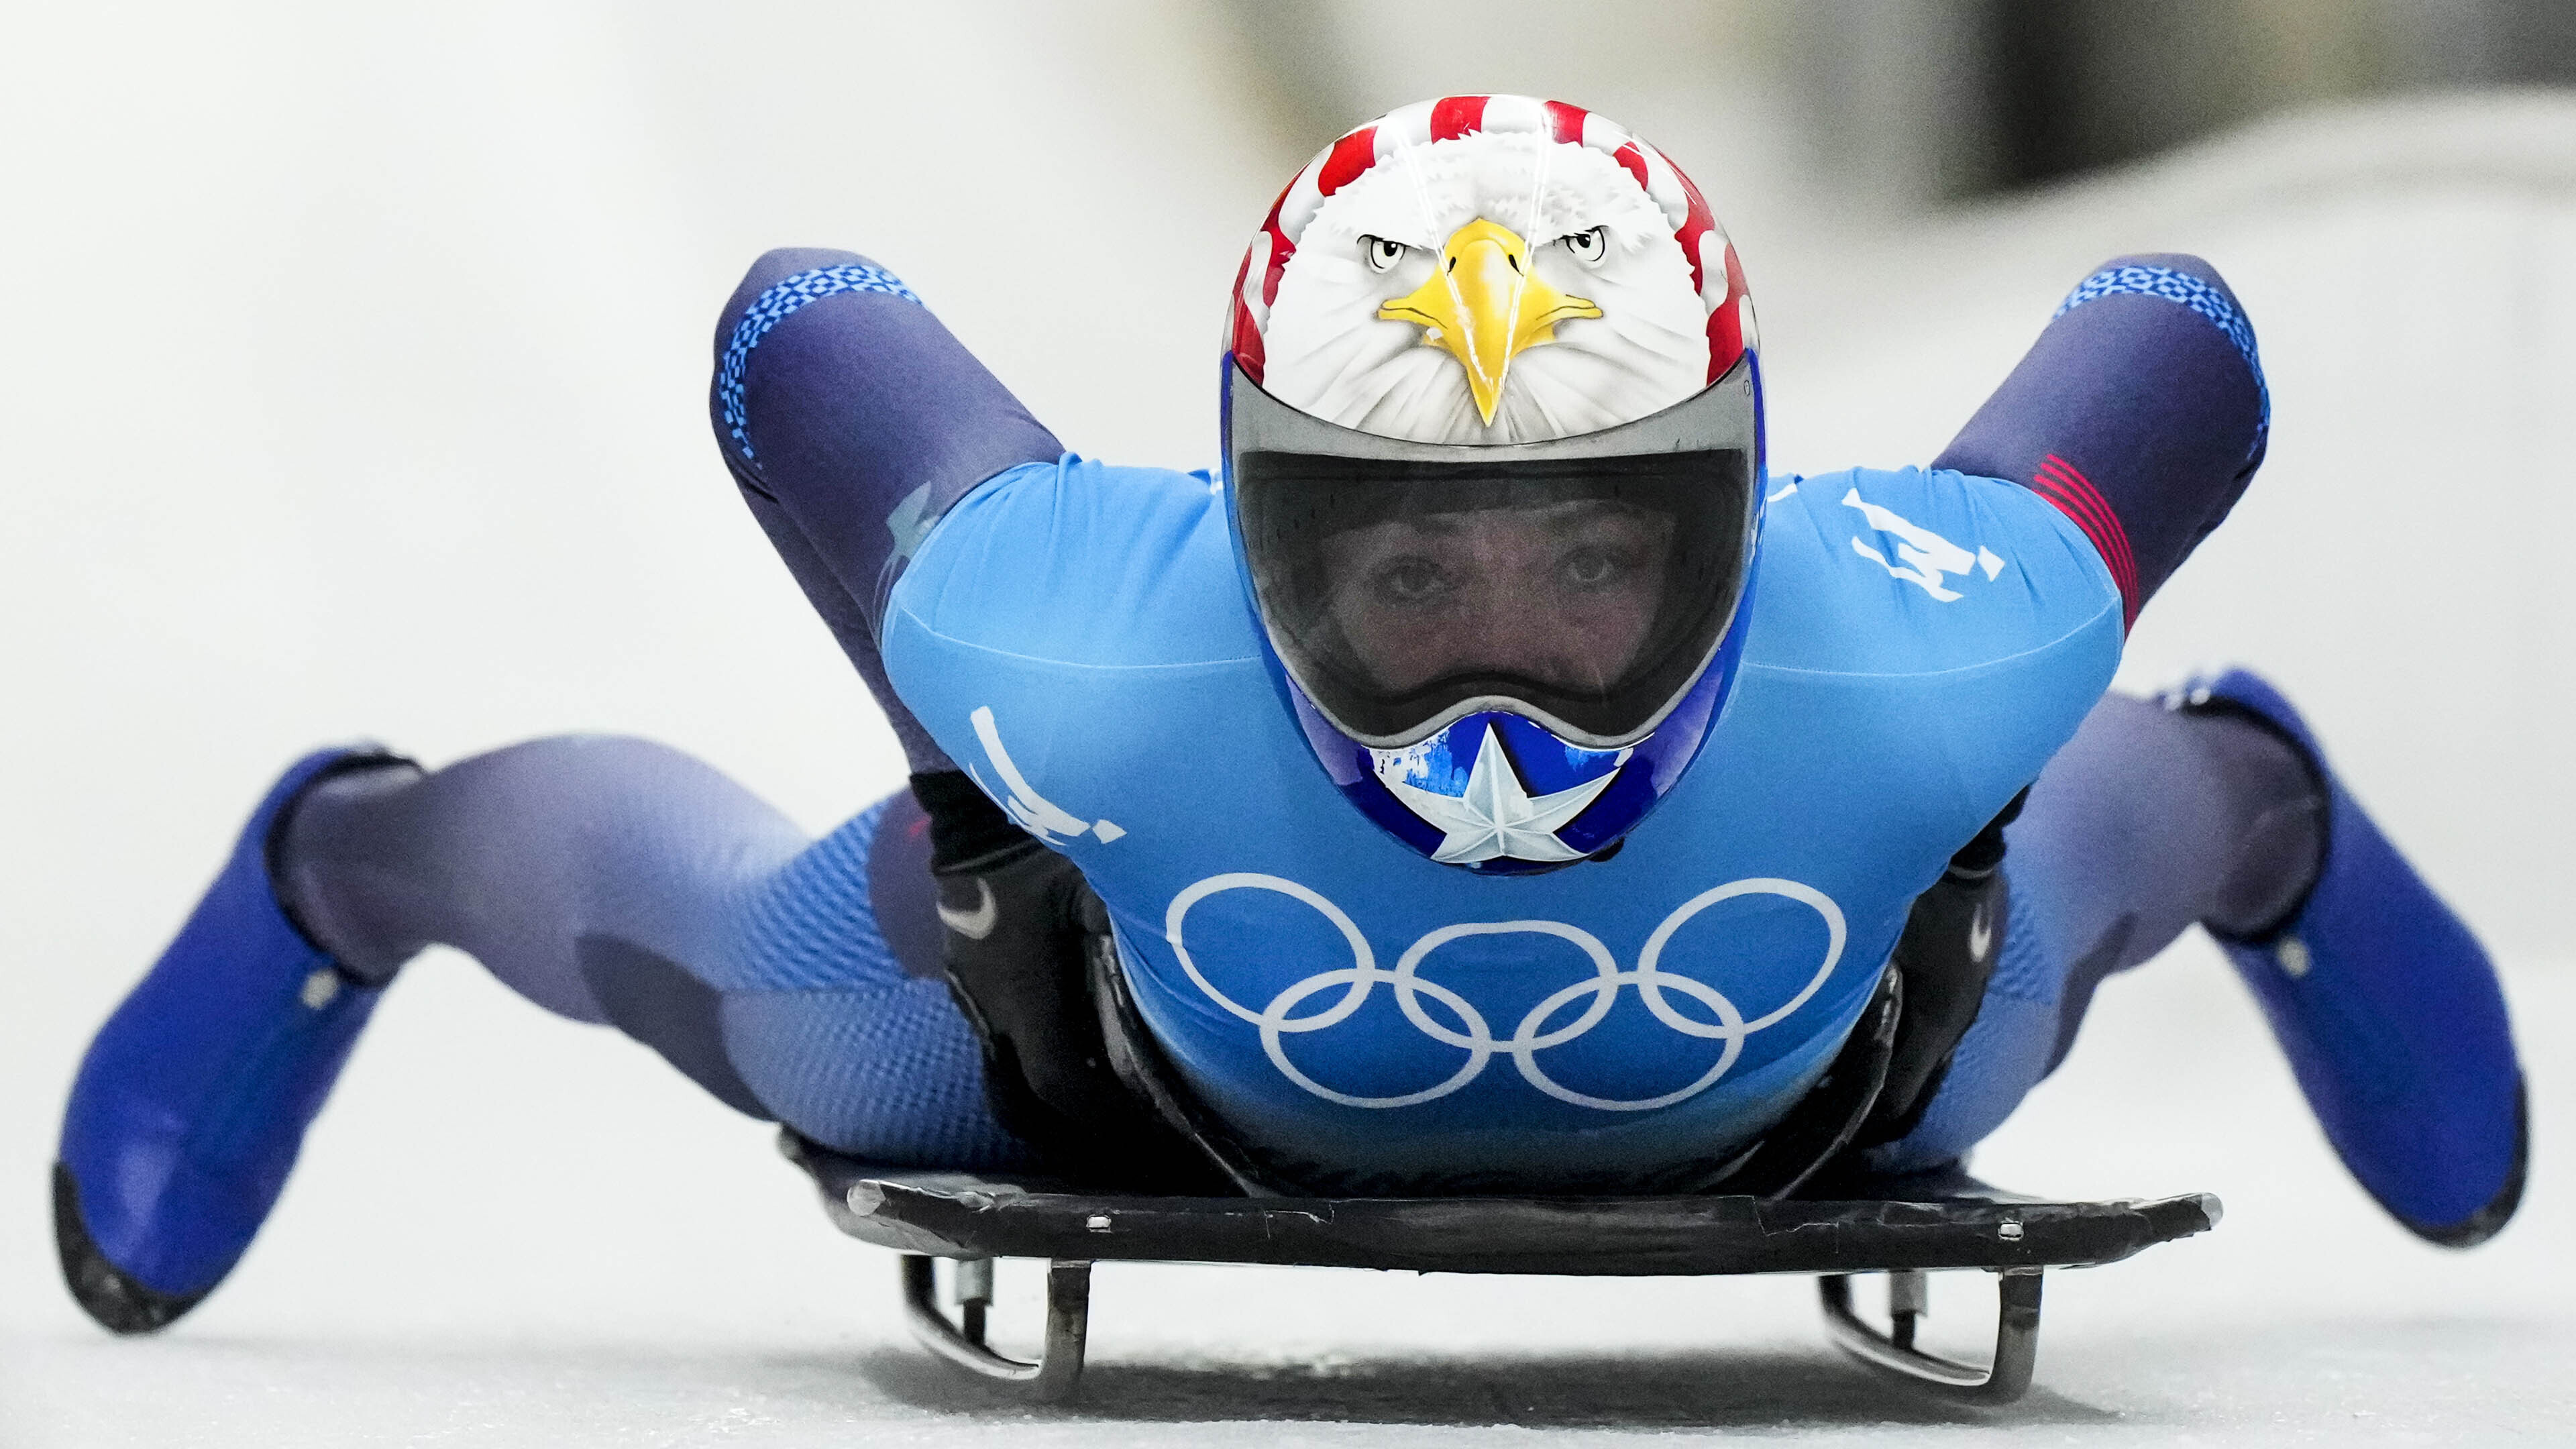 Skeleton (Sport): An American athlete competes at the 2022 Beijing Winter Olympics. 3840x2160 4K Background.